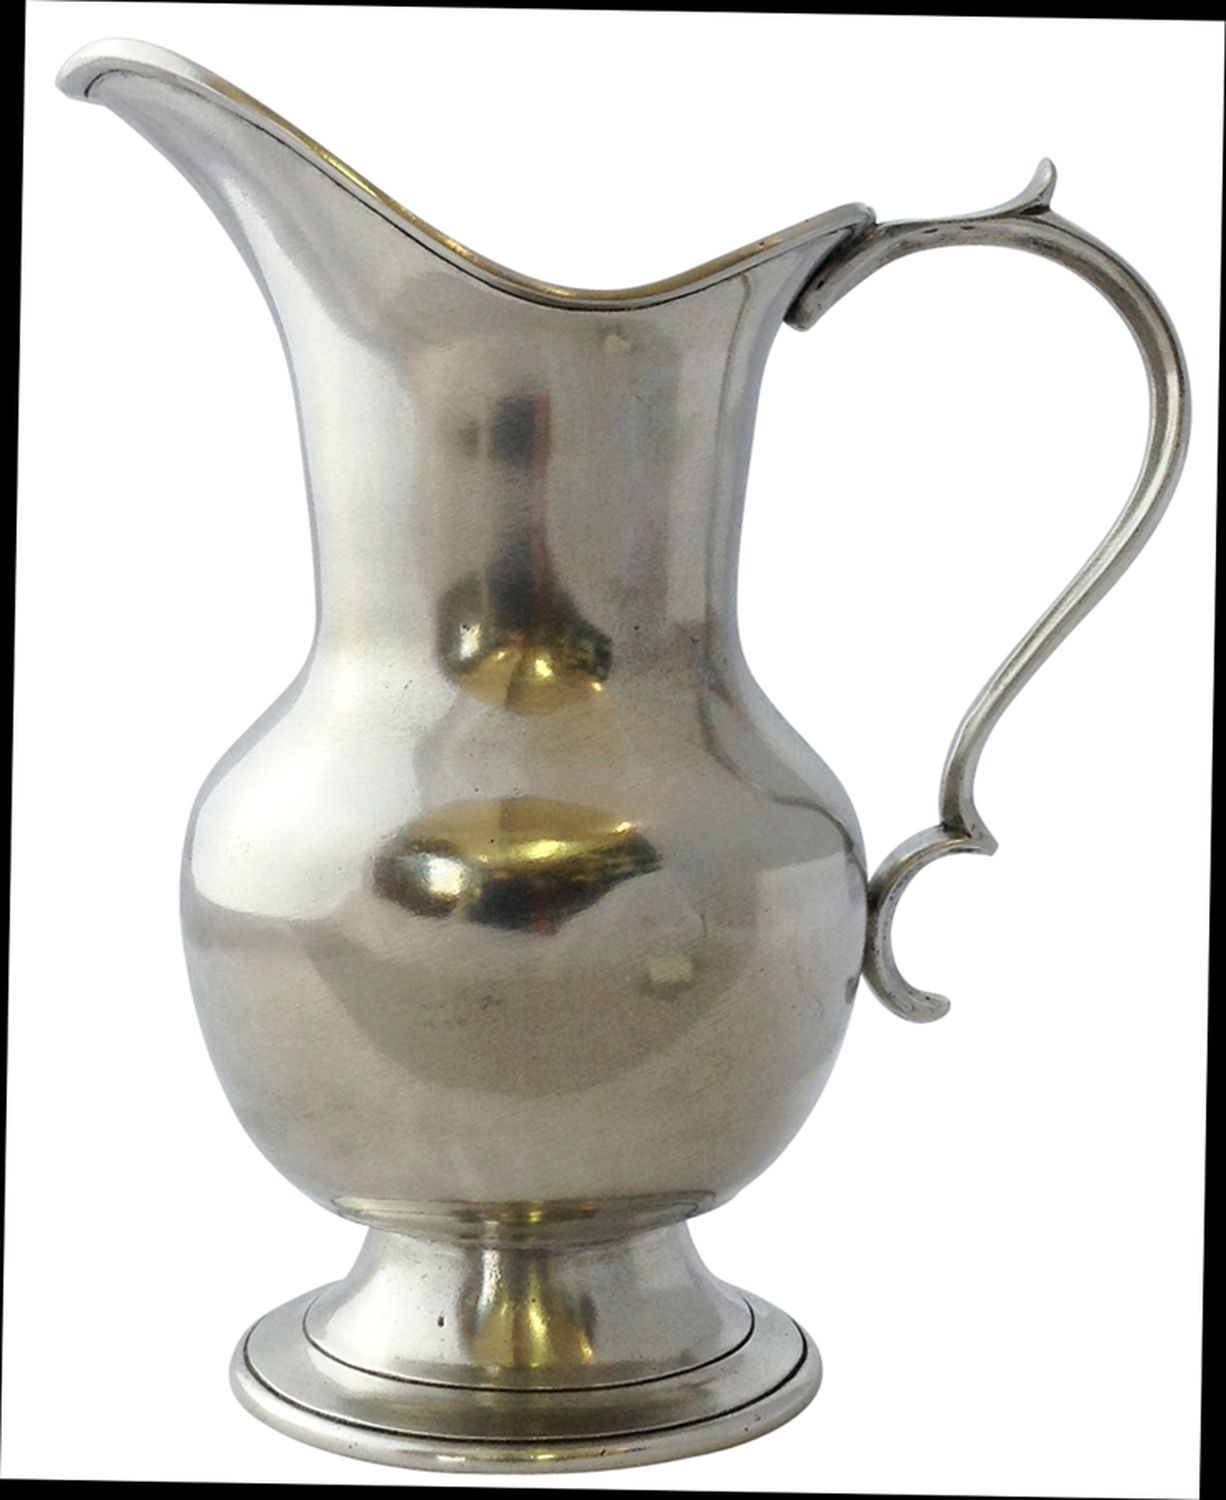 https://cdn11.bigcommerce.com/s-6zwhmb4rdr/images/stencil/original/products/98312/234914/siena-pitcher-by-match-pewter-6__30973.1652209733.jpg